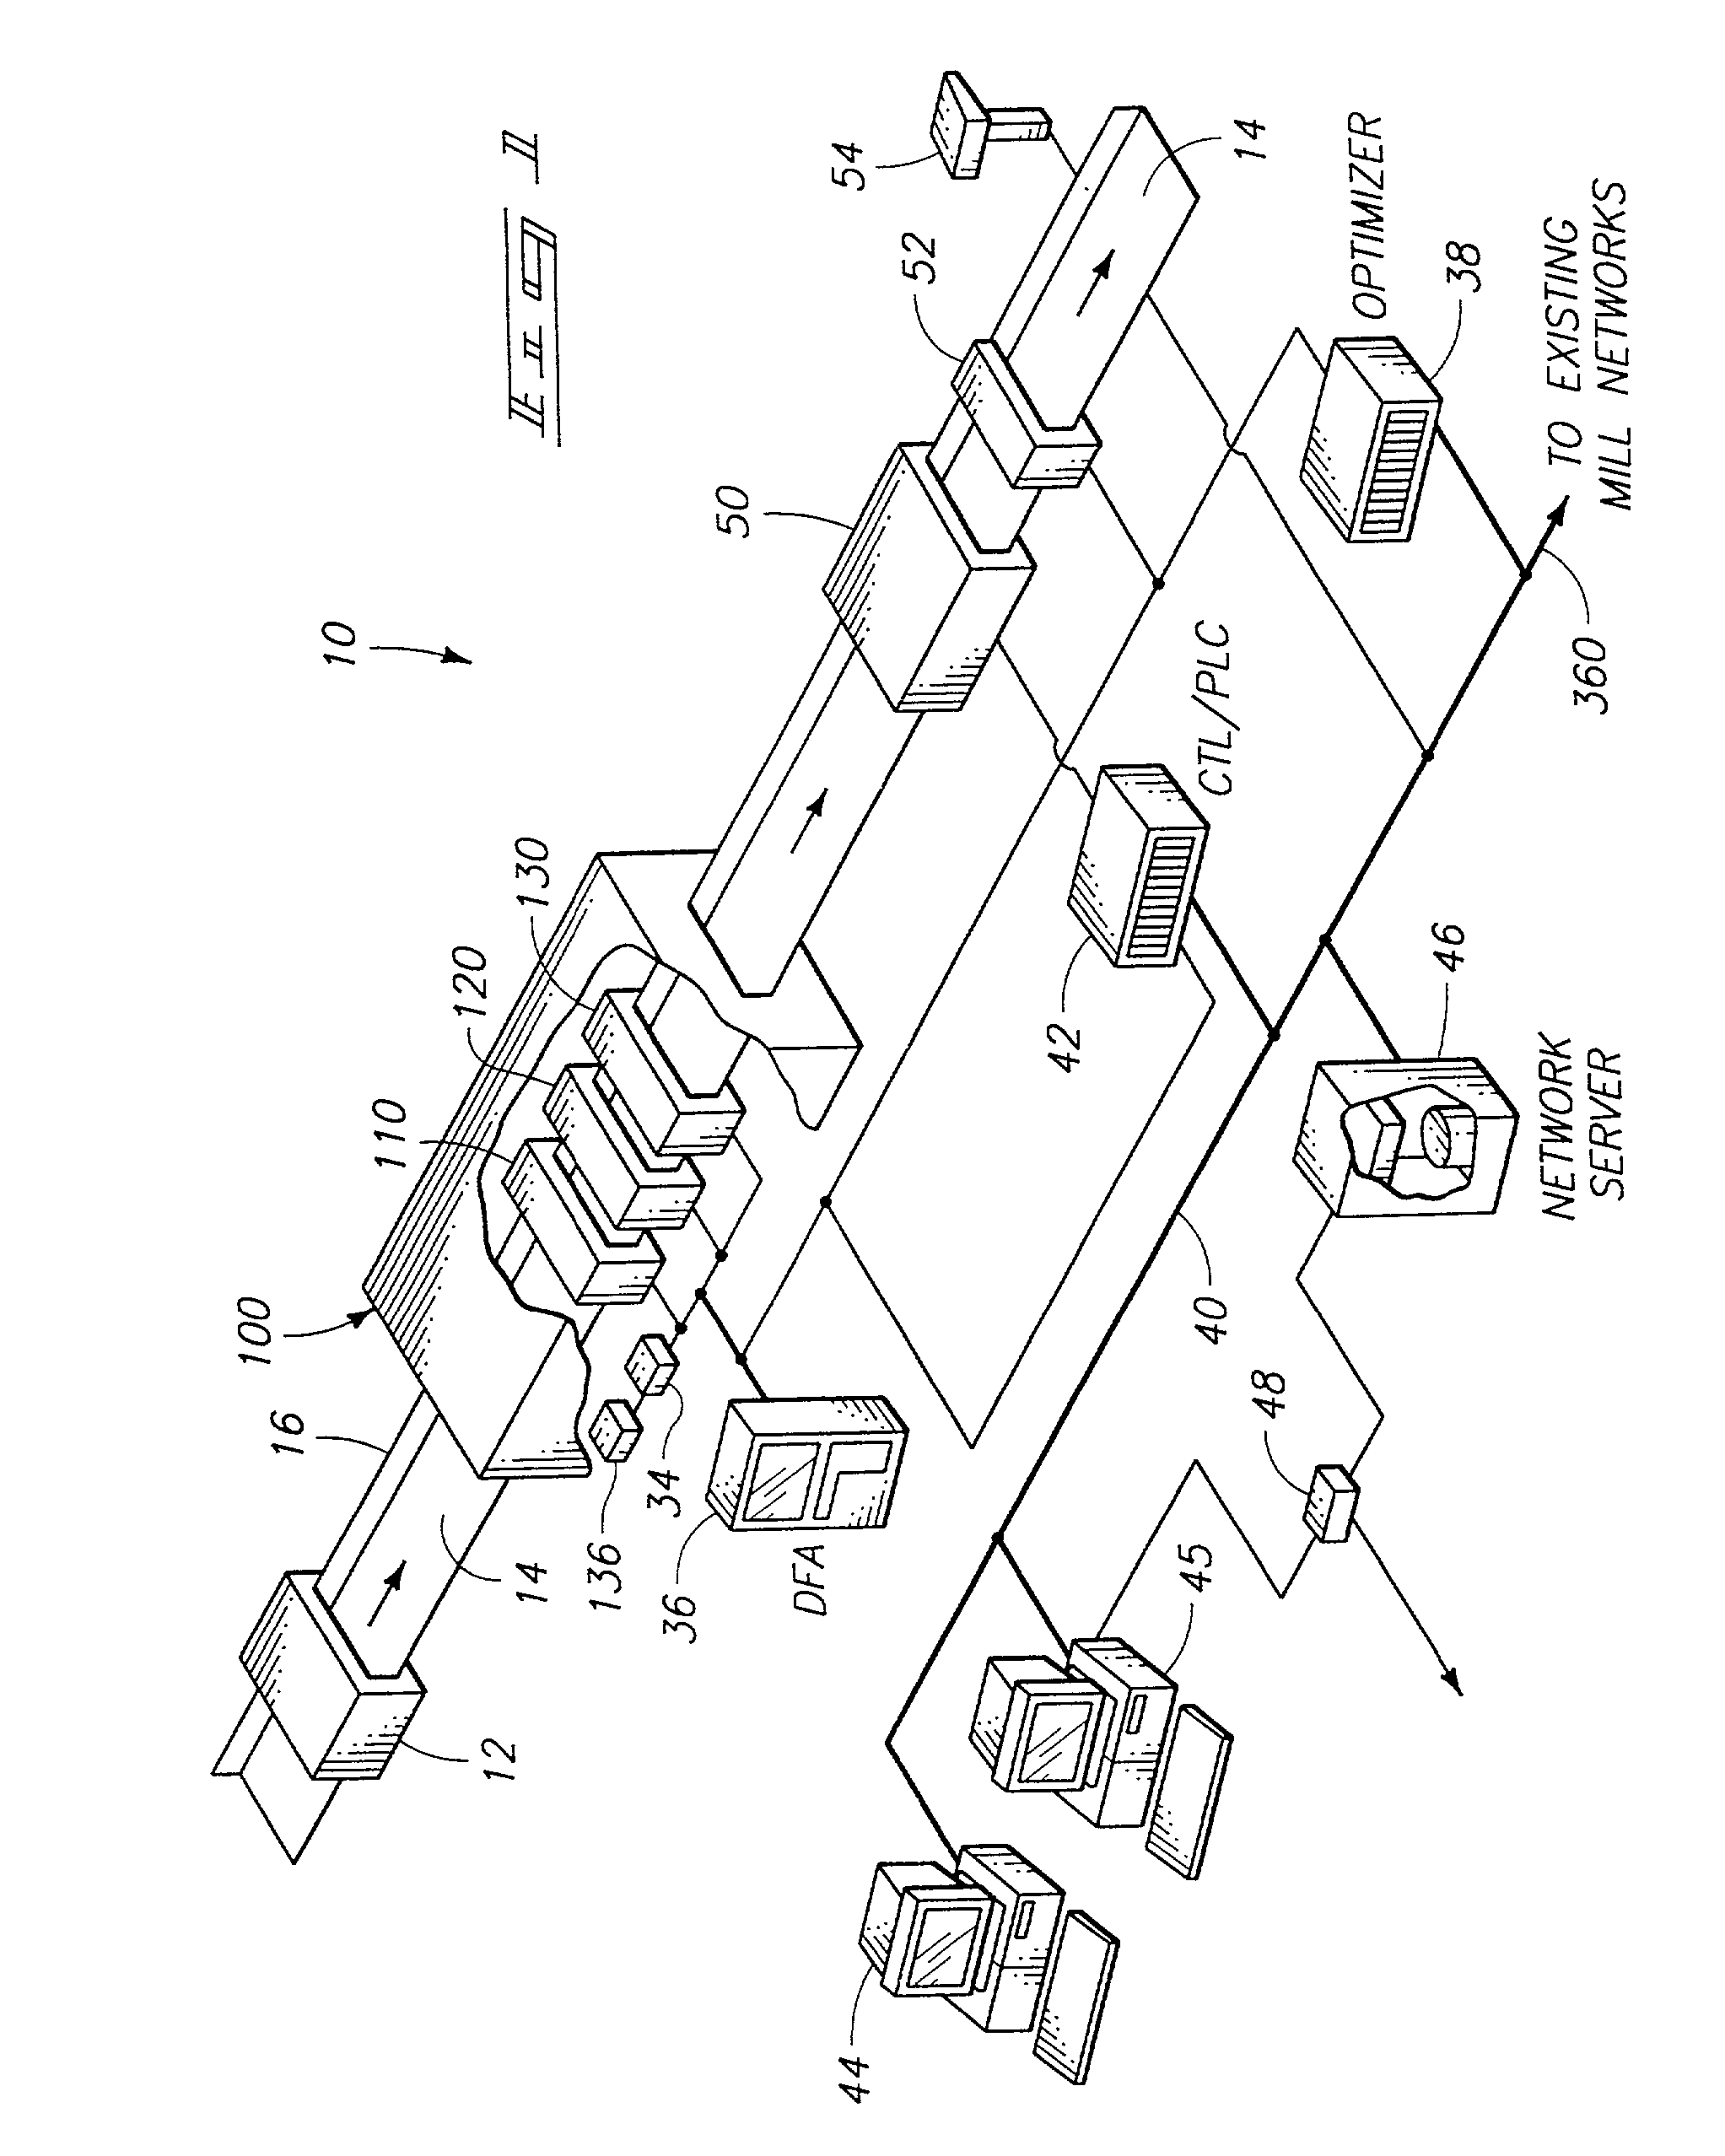 Method and apparatus for improved inspection and classification of attributes of a workpiece